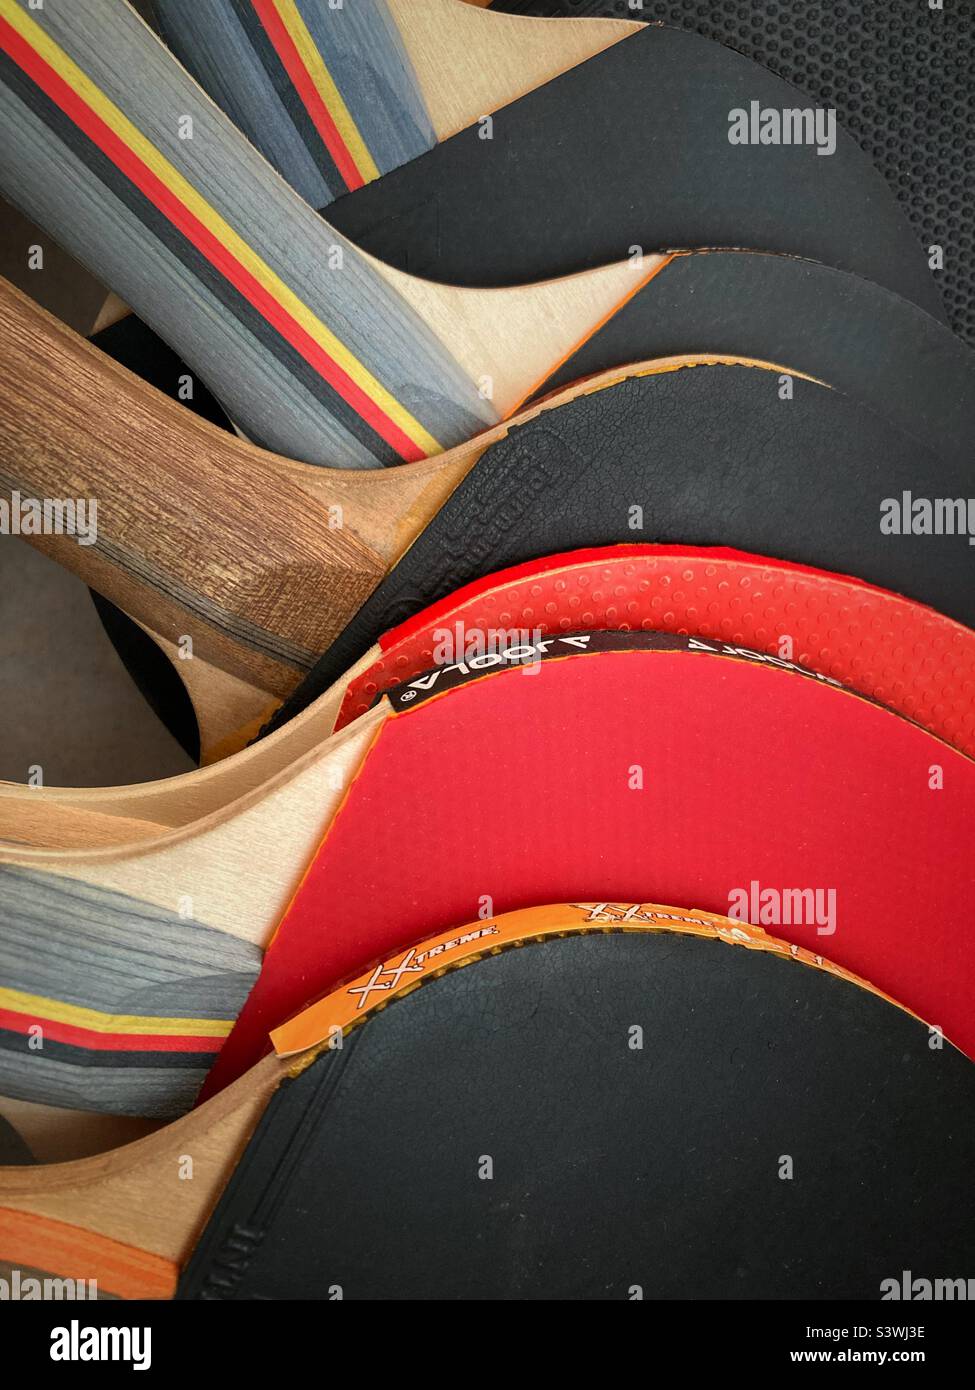 Six table tennis paddles lying on Top of each other Stock Photo